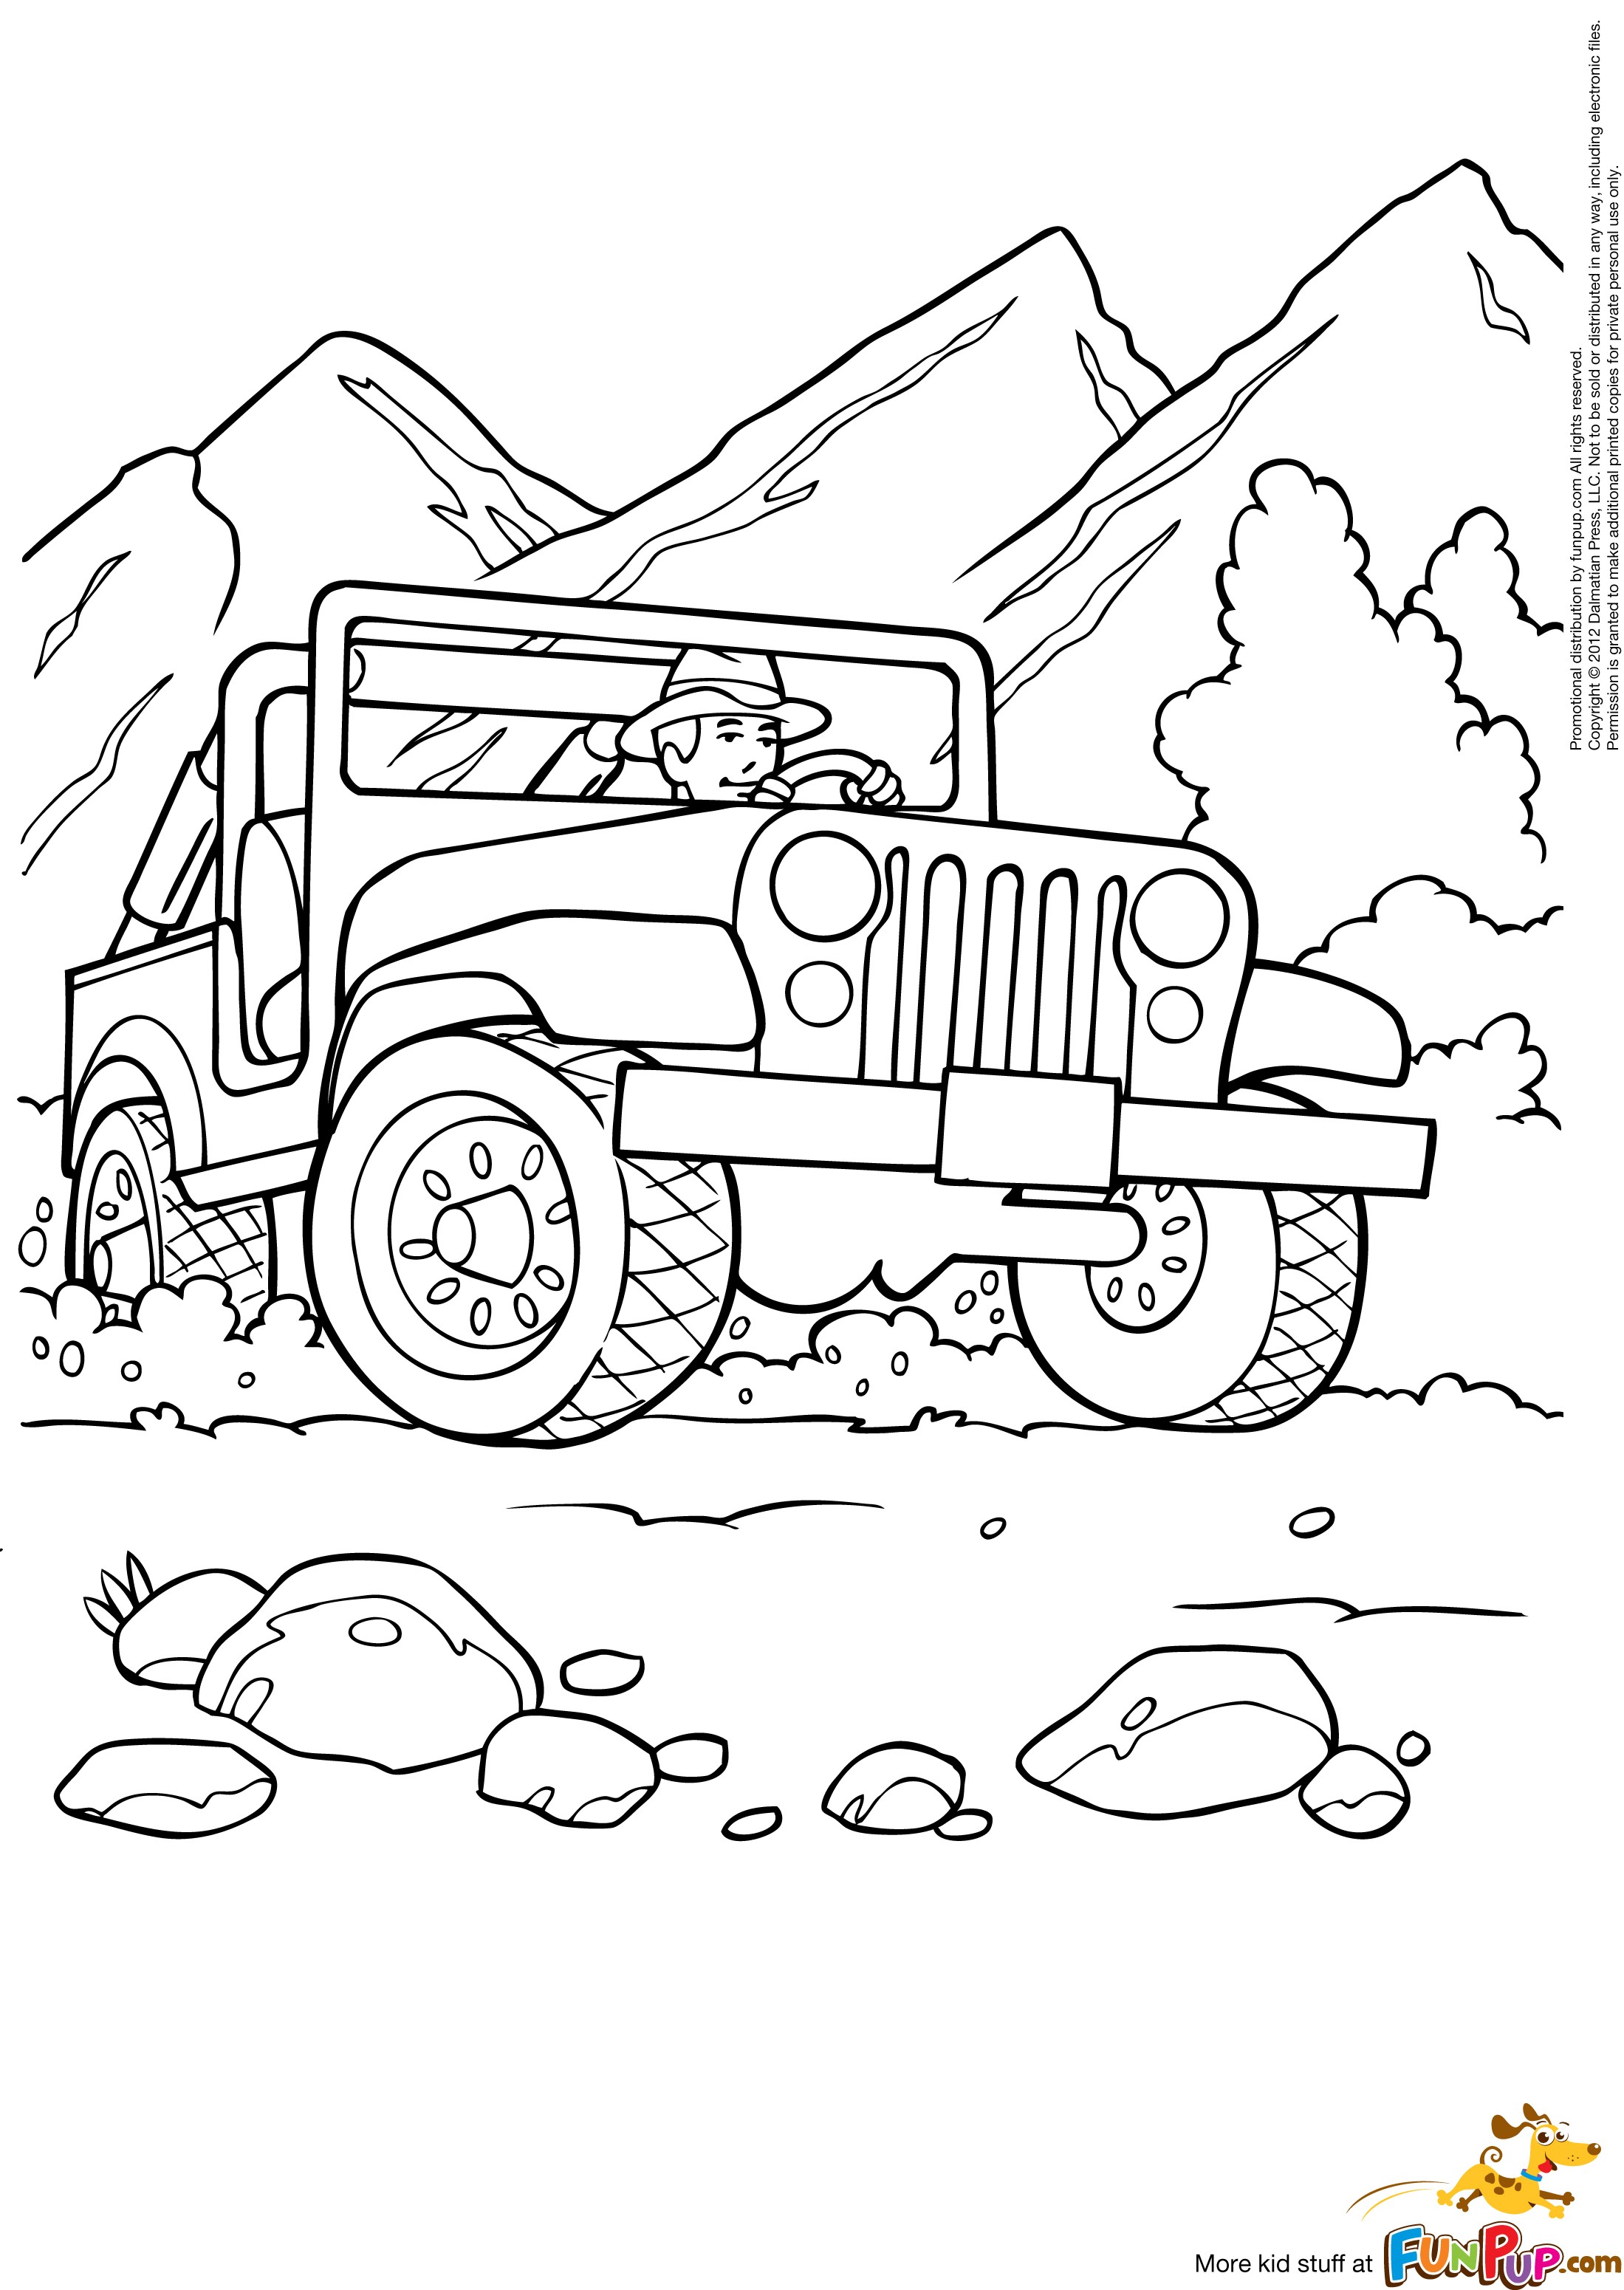  Jeep Coloring Pages | CAR Coloring pages | Cool Cars | #22